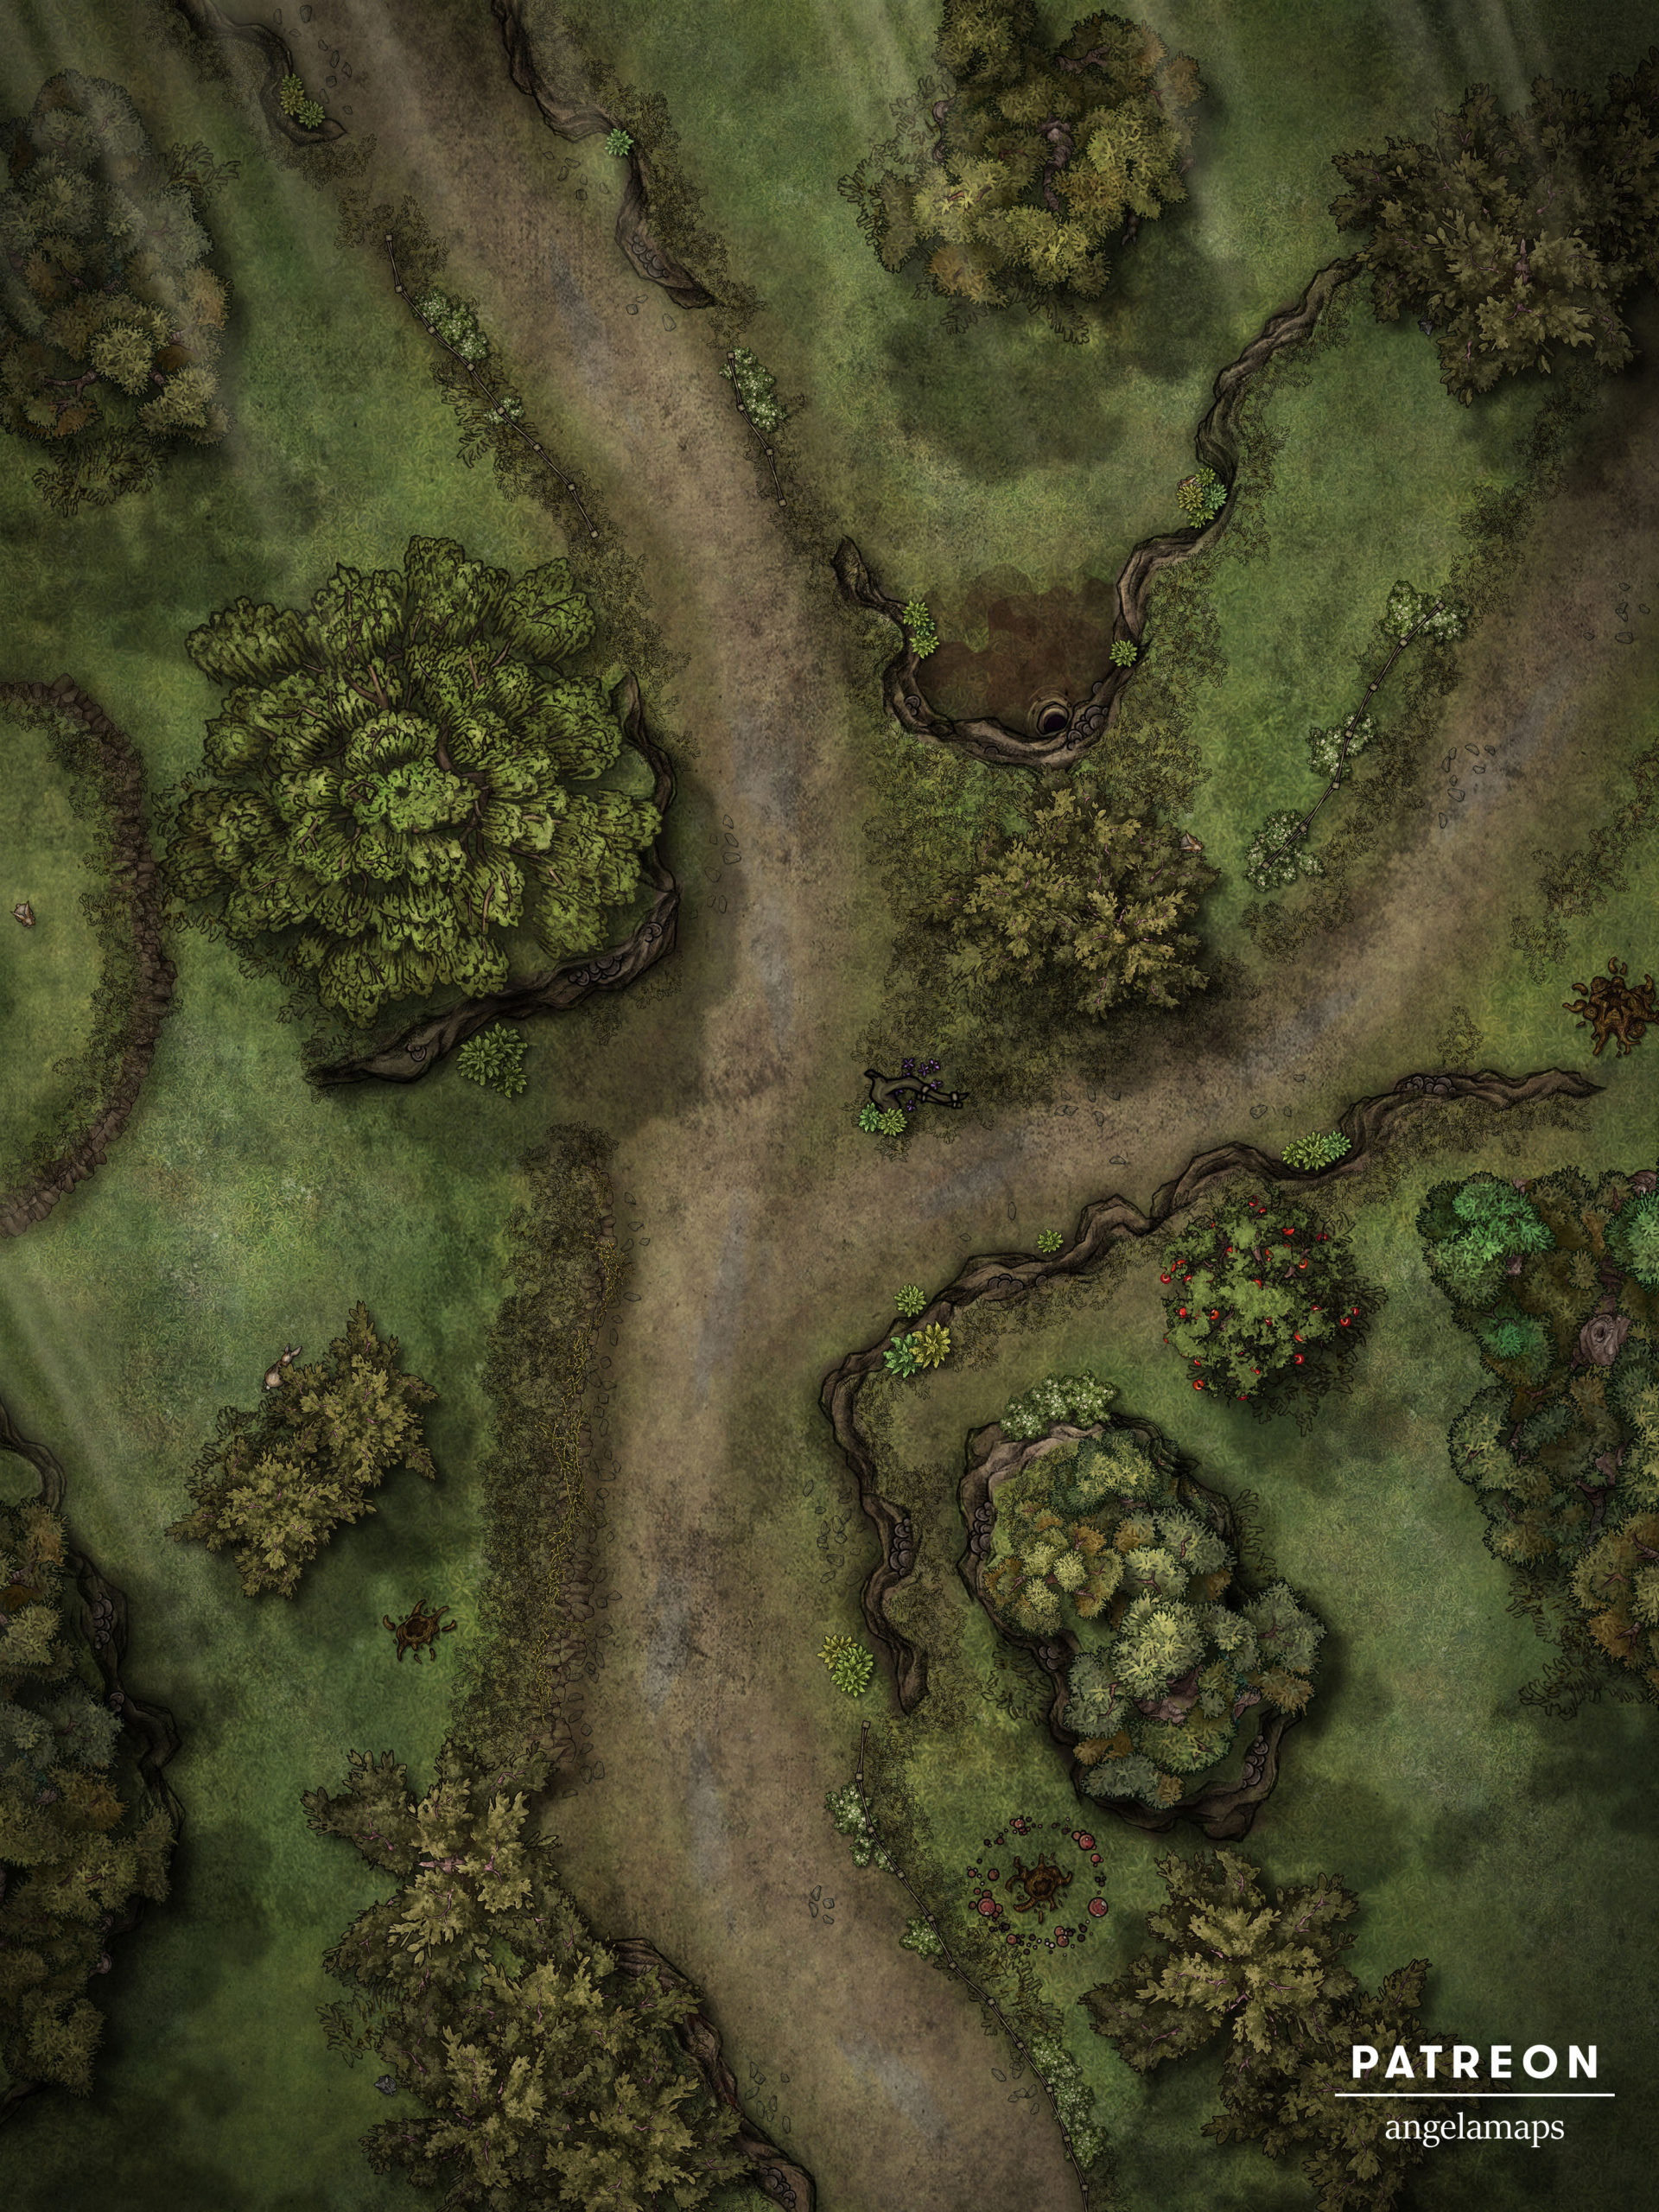 Crossroads in a forest battle map from Angela Maps